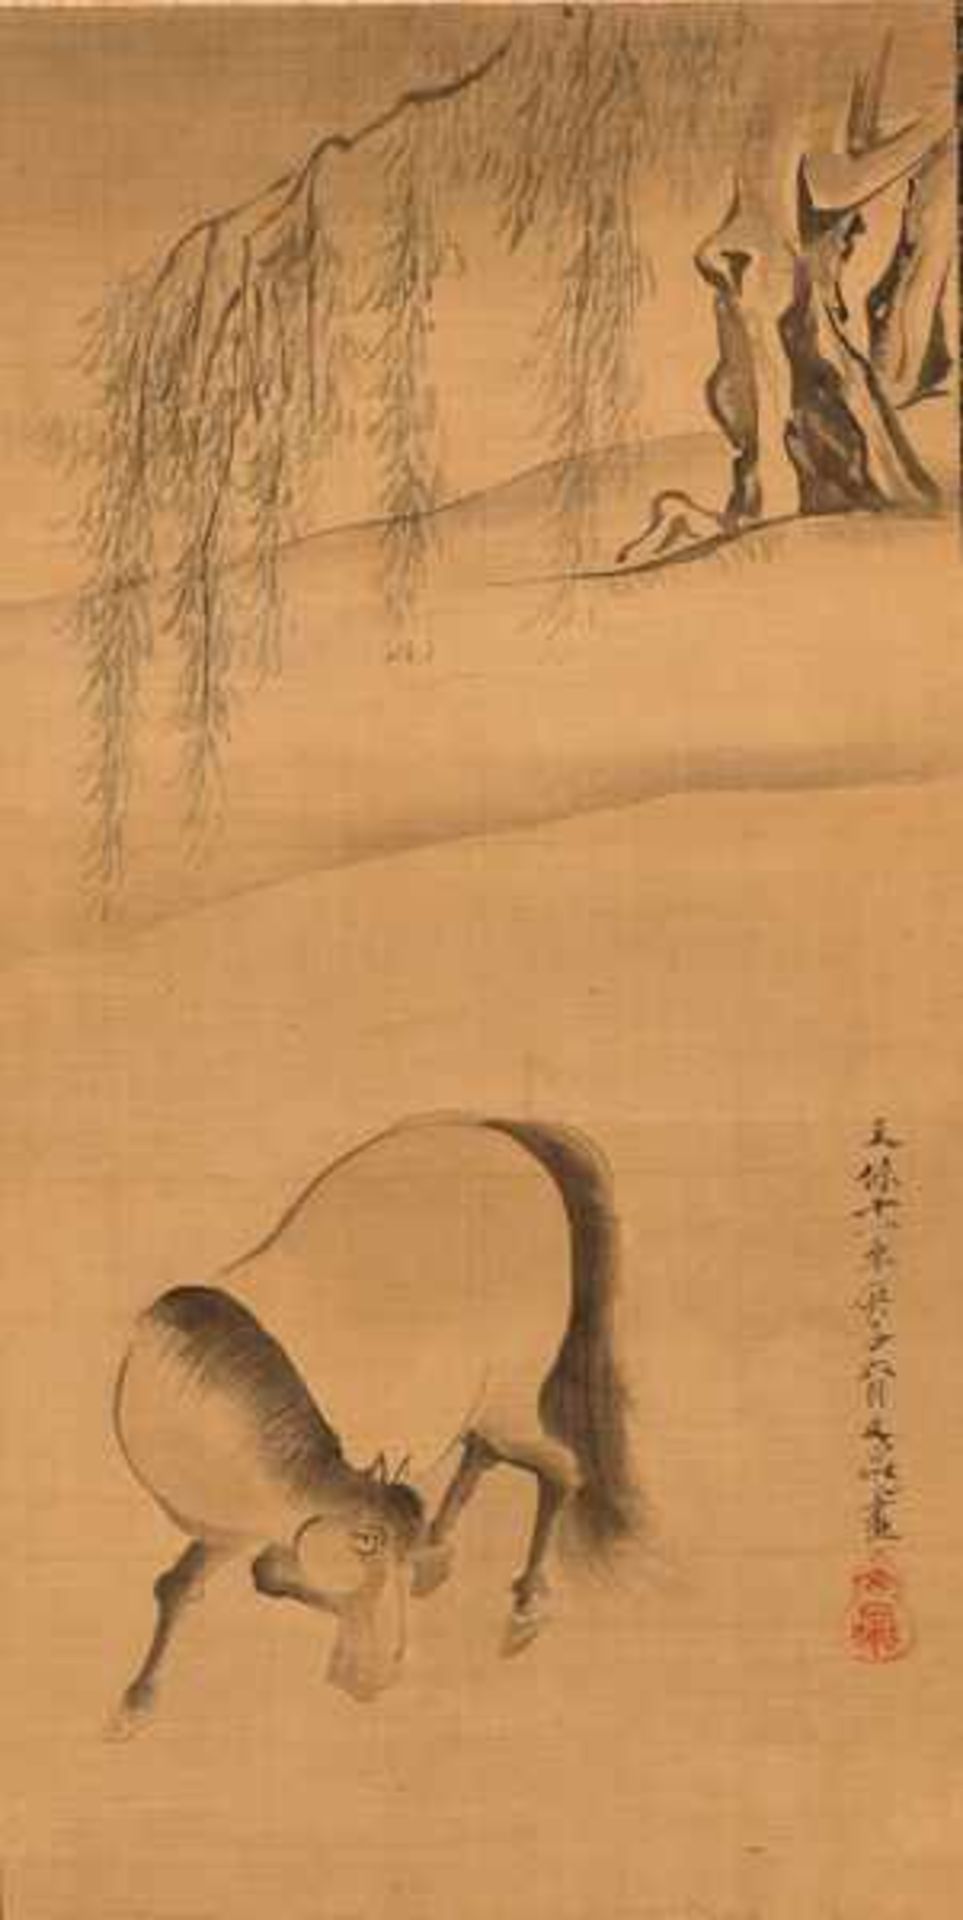 A TATEMONO BY TANI BUNCHO (1763- 1840) OF A HORSE UNDER A WILLOW Tatemono painting with ink and